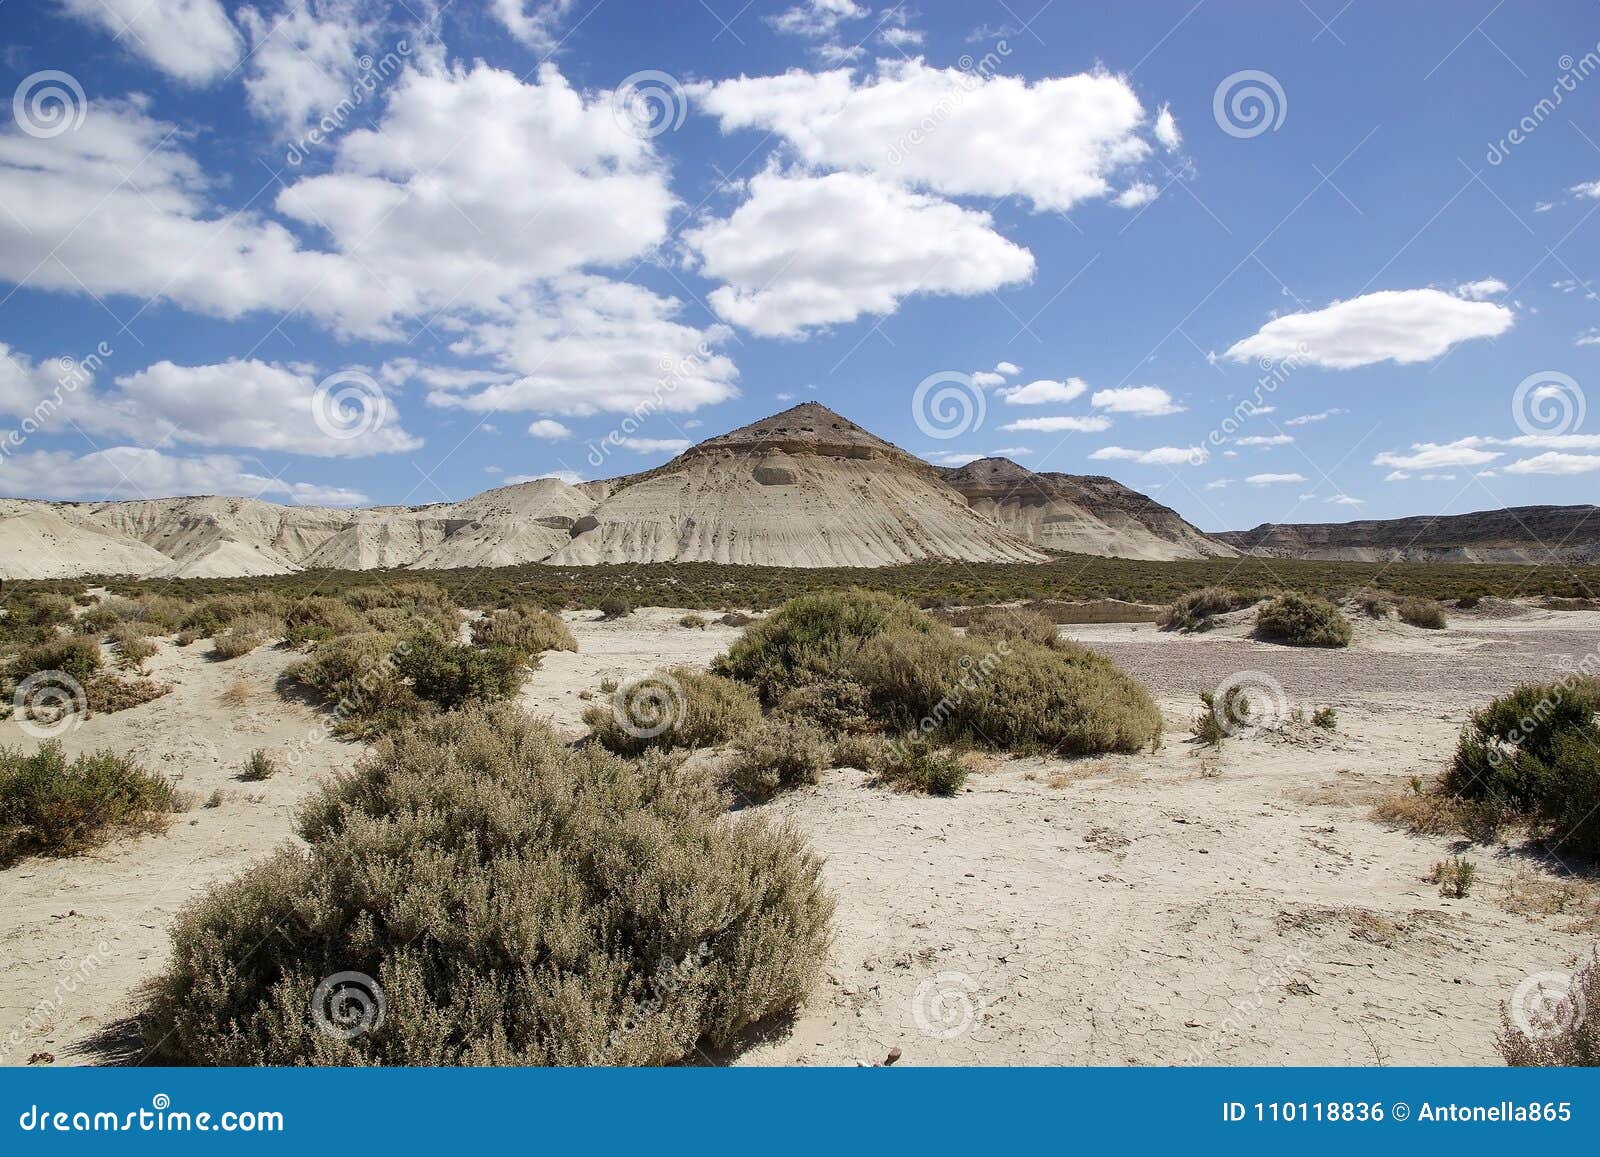 landscape after punta loma near puerto madryn, a city in chubut province, patagonia, argentina